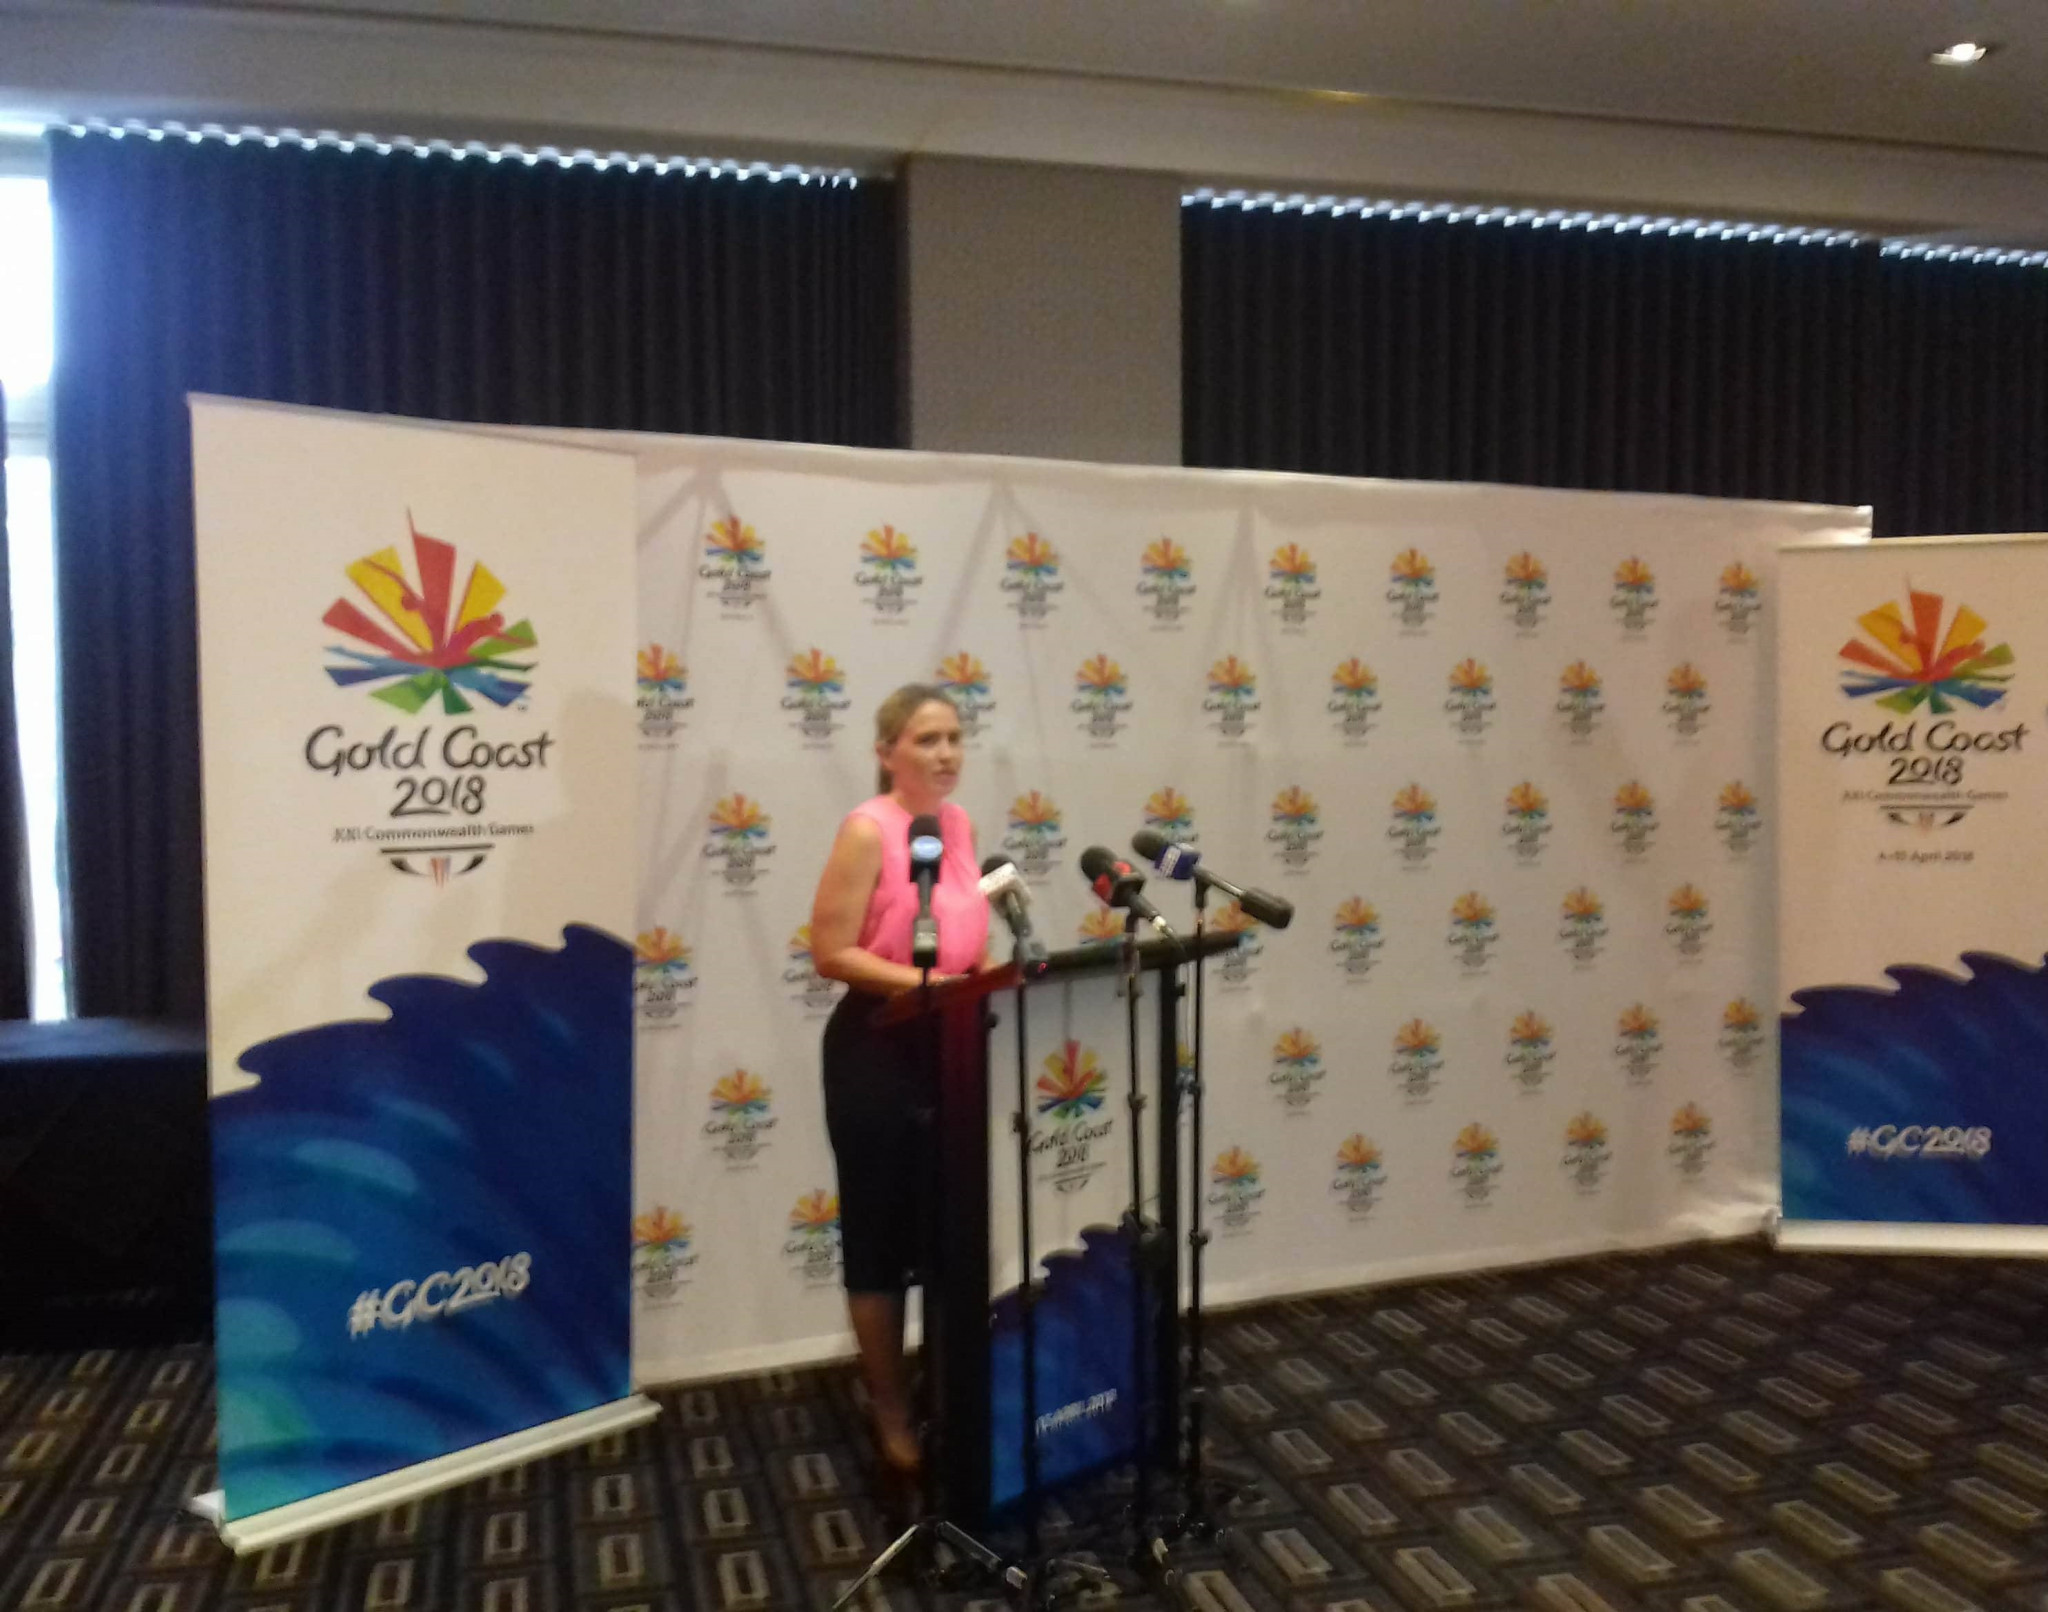 Seminar will highlight Gold Coast's readiness for Commonwealth Games, Minister claims